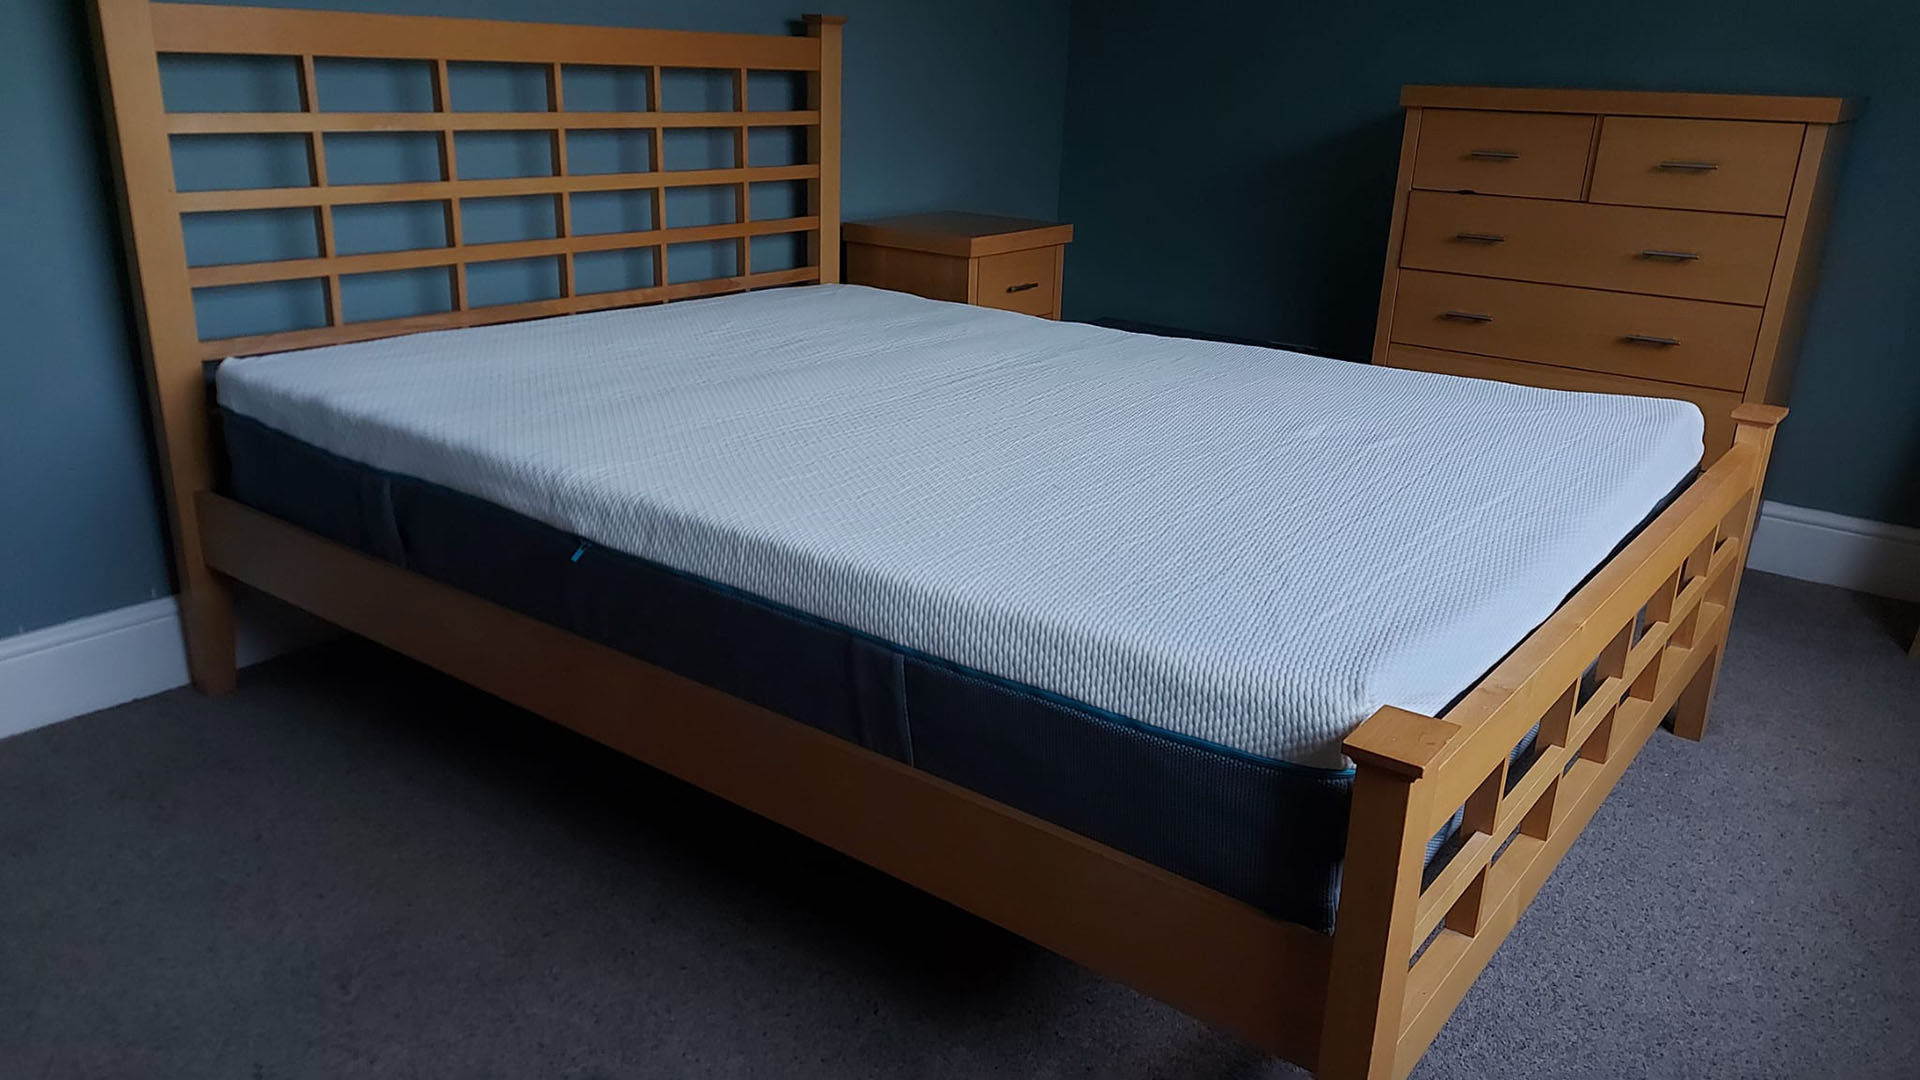 Simba Hybrid Pro mattress in reviewer's bedroom